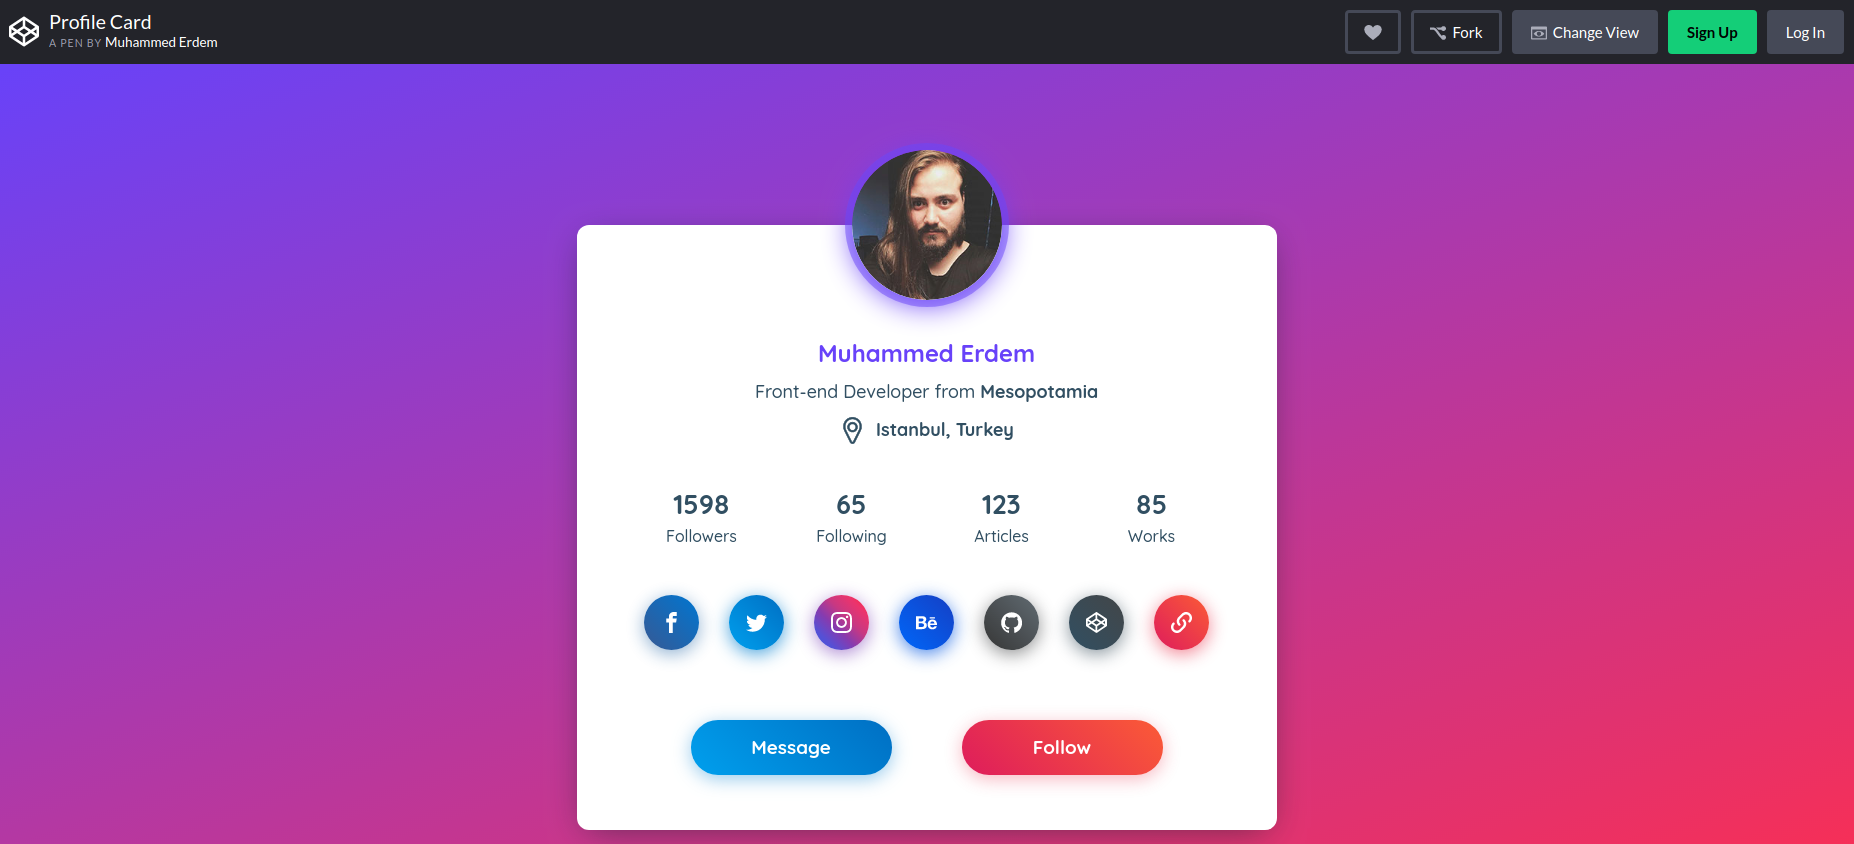 10 Free Bootstrap Card Examples To Guarantee a Better User Experience